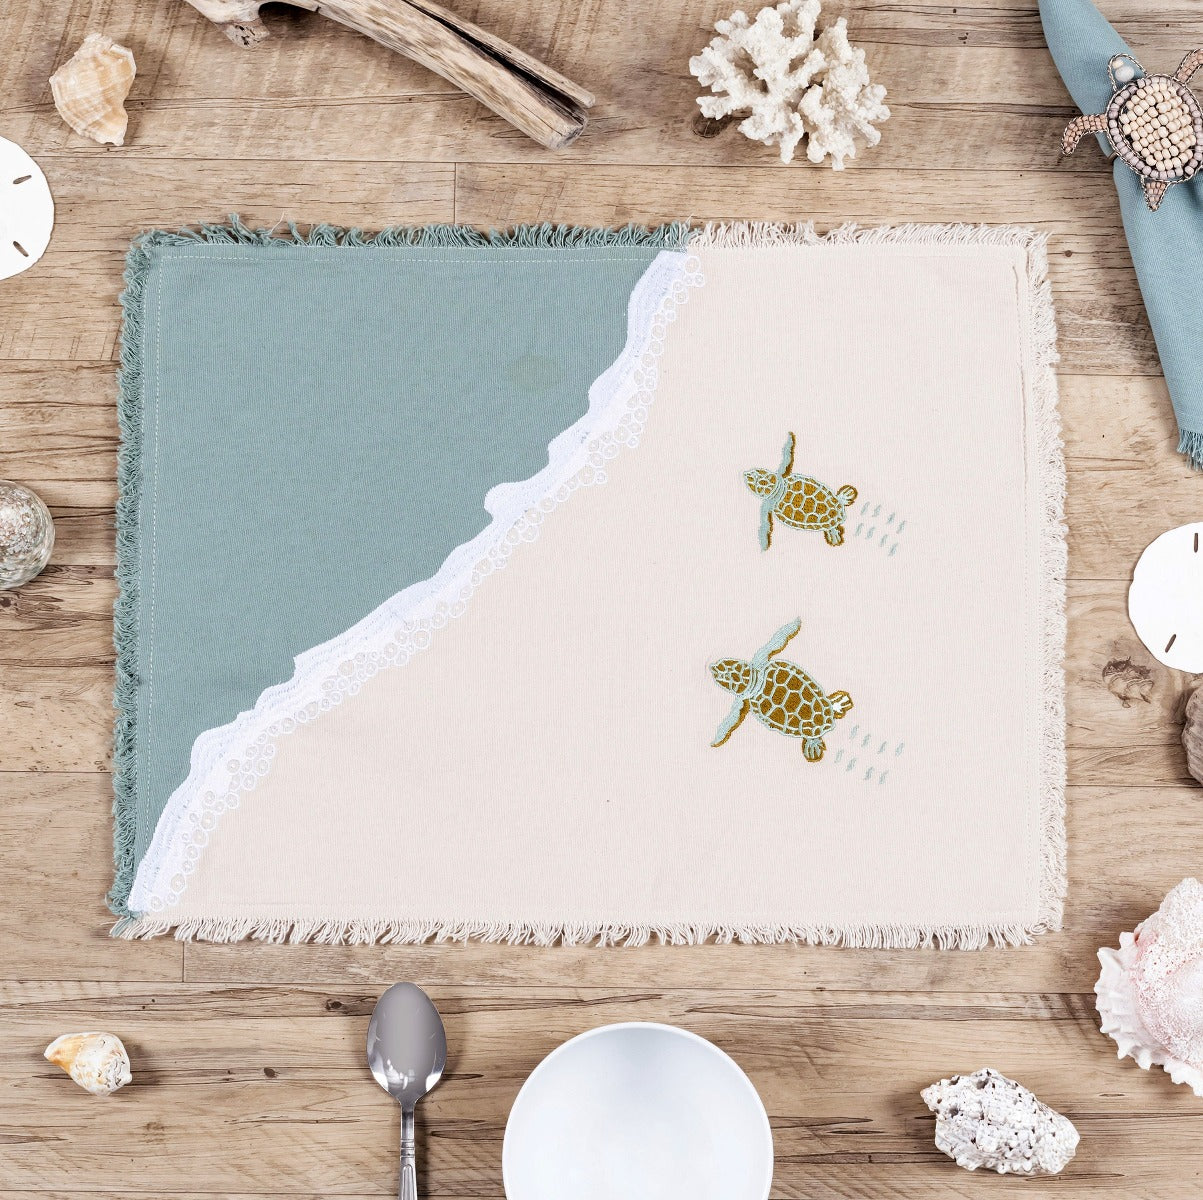 Baby Sea Turtles on Beach Embroidered Placemat